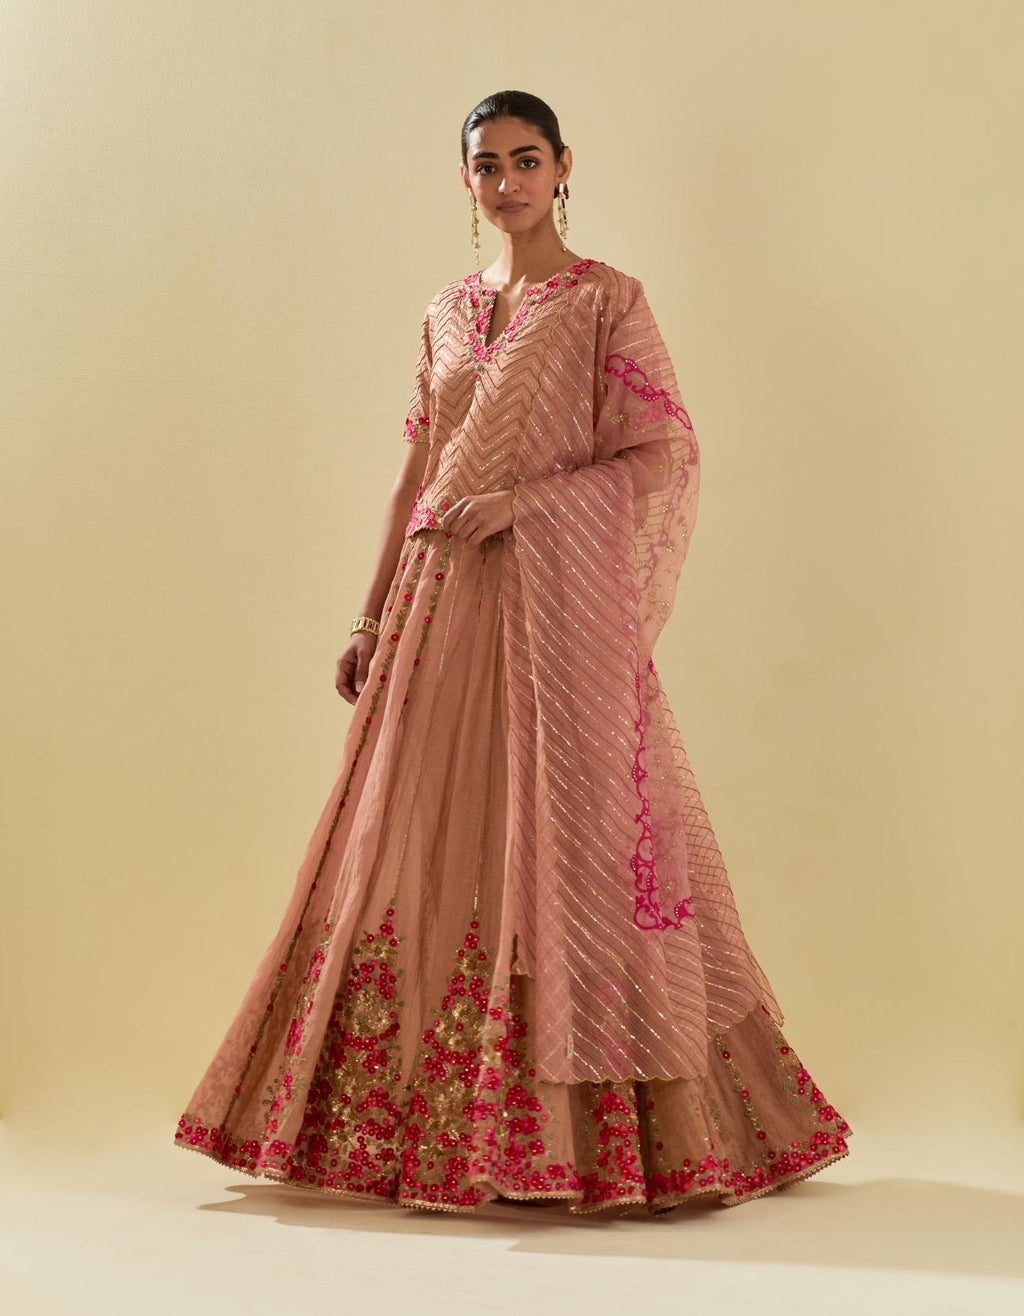 Pink silk organza dupatta with delicate gold zari embroidery & silk applique work, highlighted with gold sequins and beads.